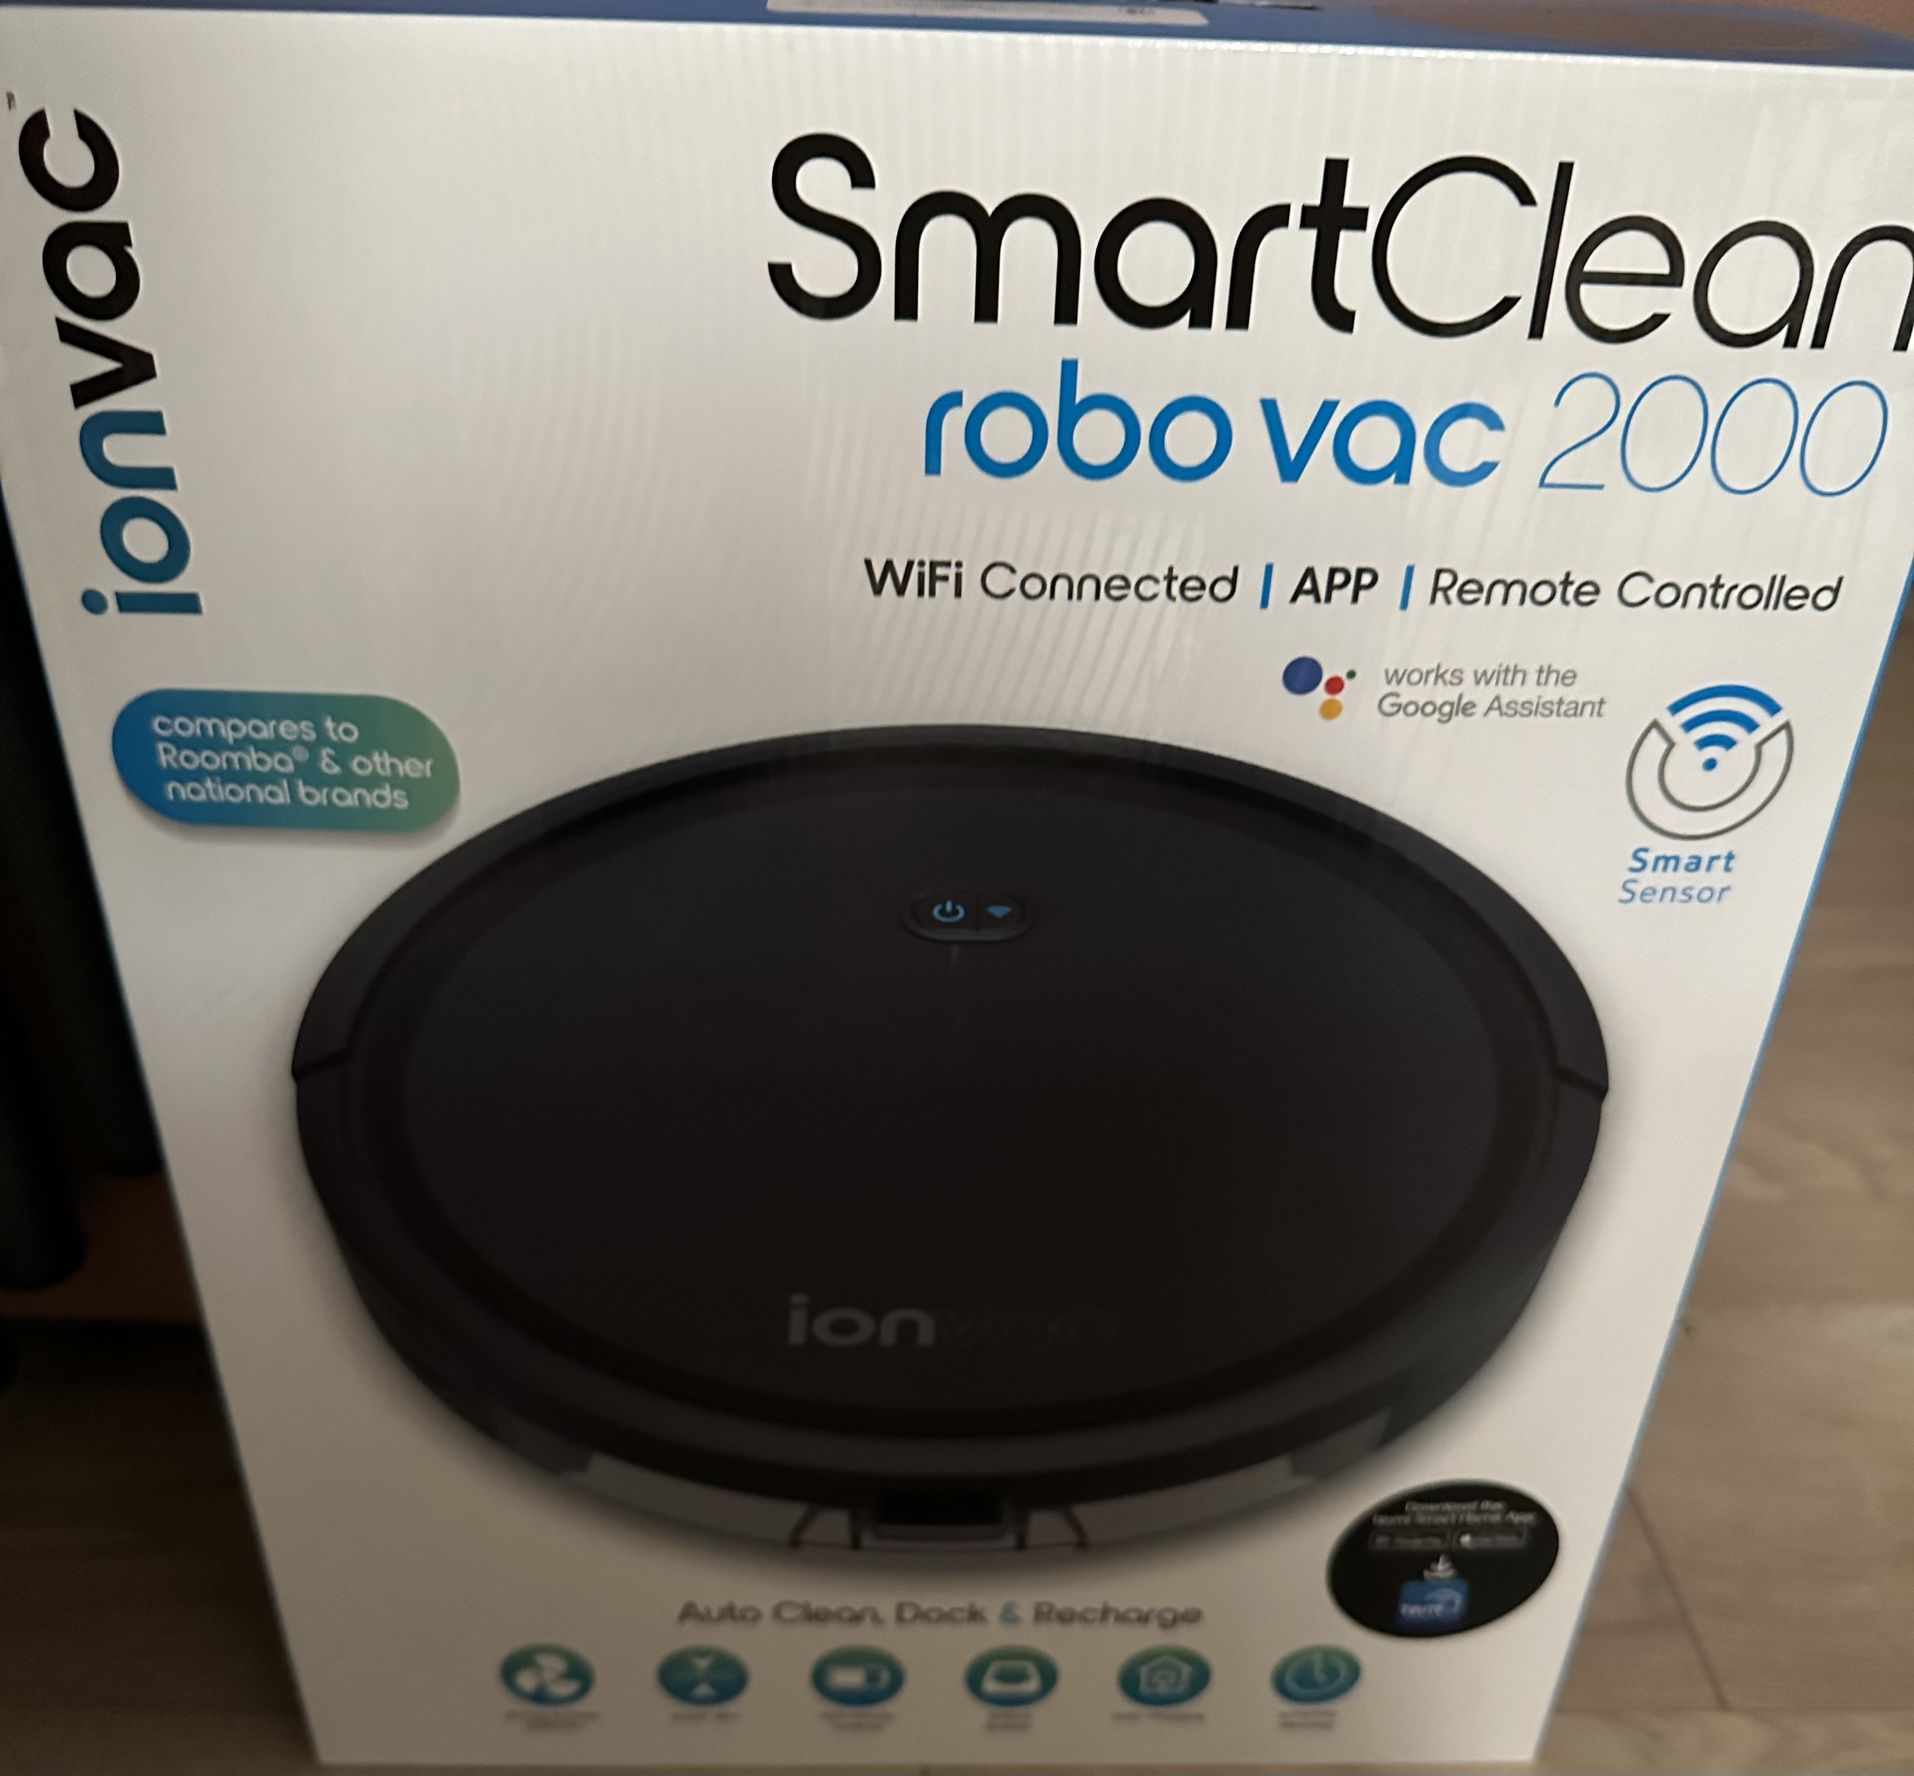  ICONIC SmartClean 2000 Robovac - WiFi Robotic Vacuum with App and Remote Control